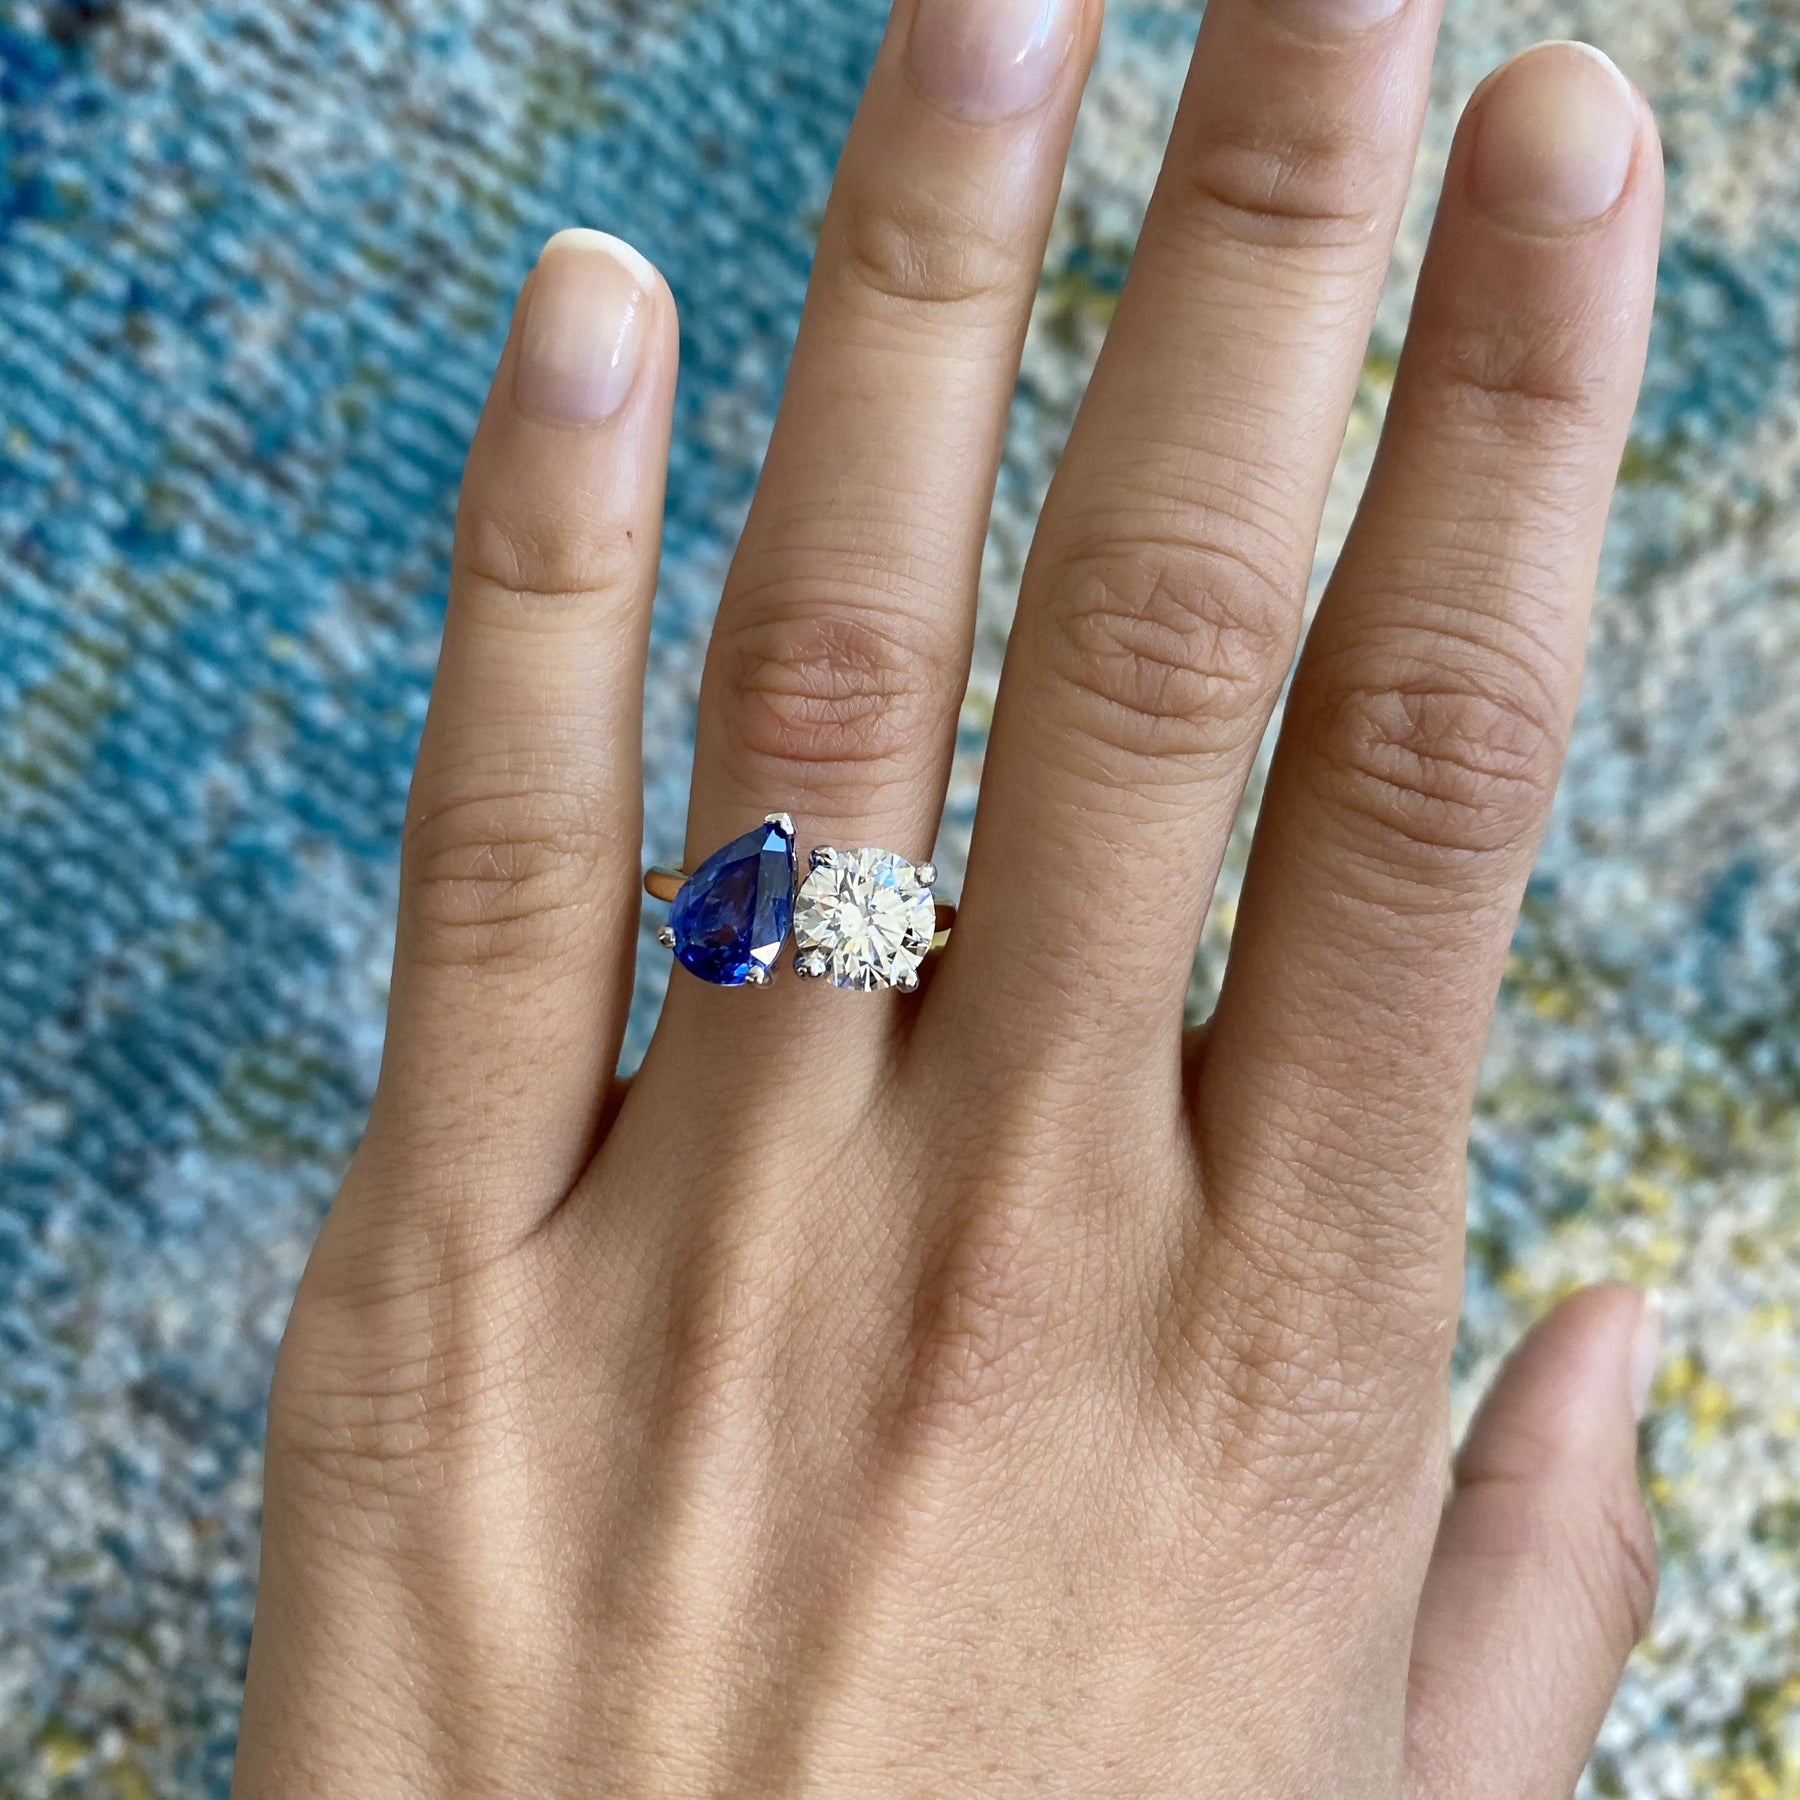 JeenMata 1.5 Carat Pear Shaped Lab Created Blue Sapphire Engagement Ring in  18k White Gold Over Silver - Walmart.com